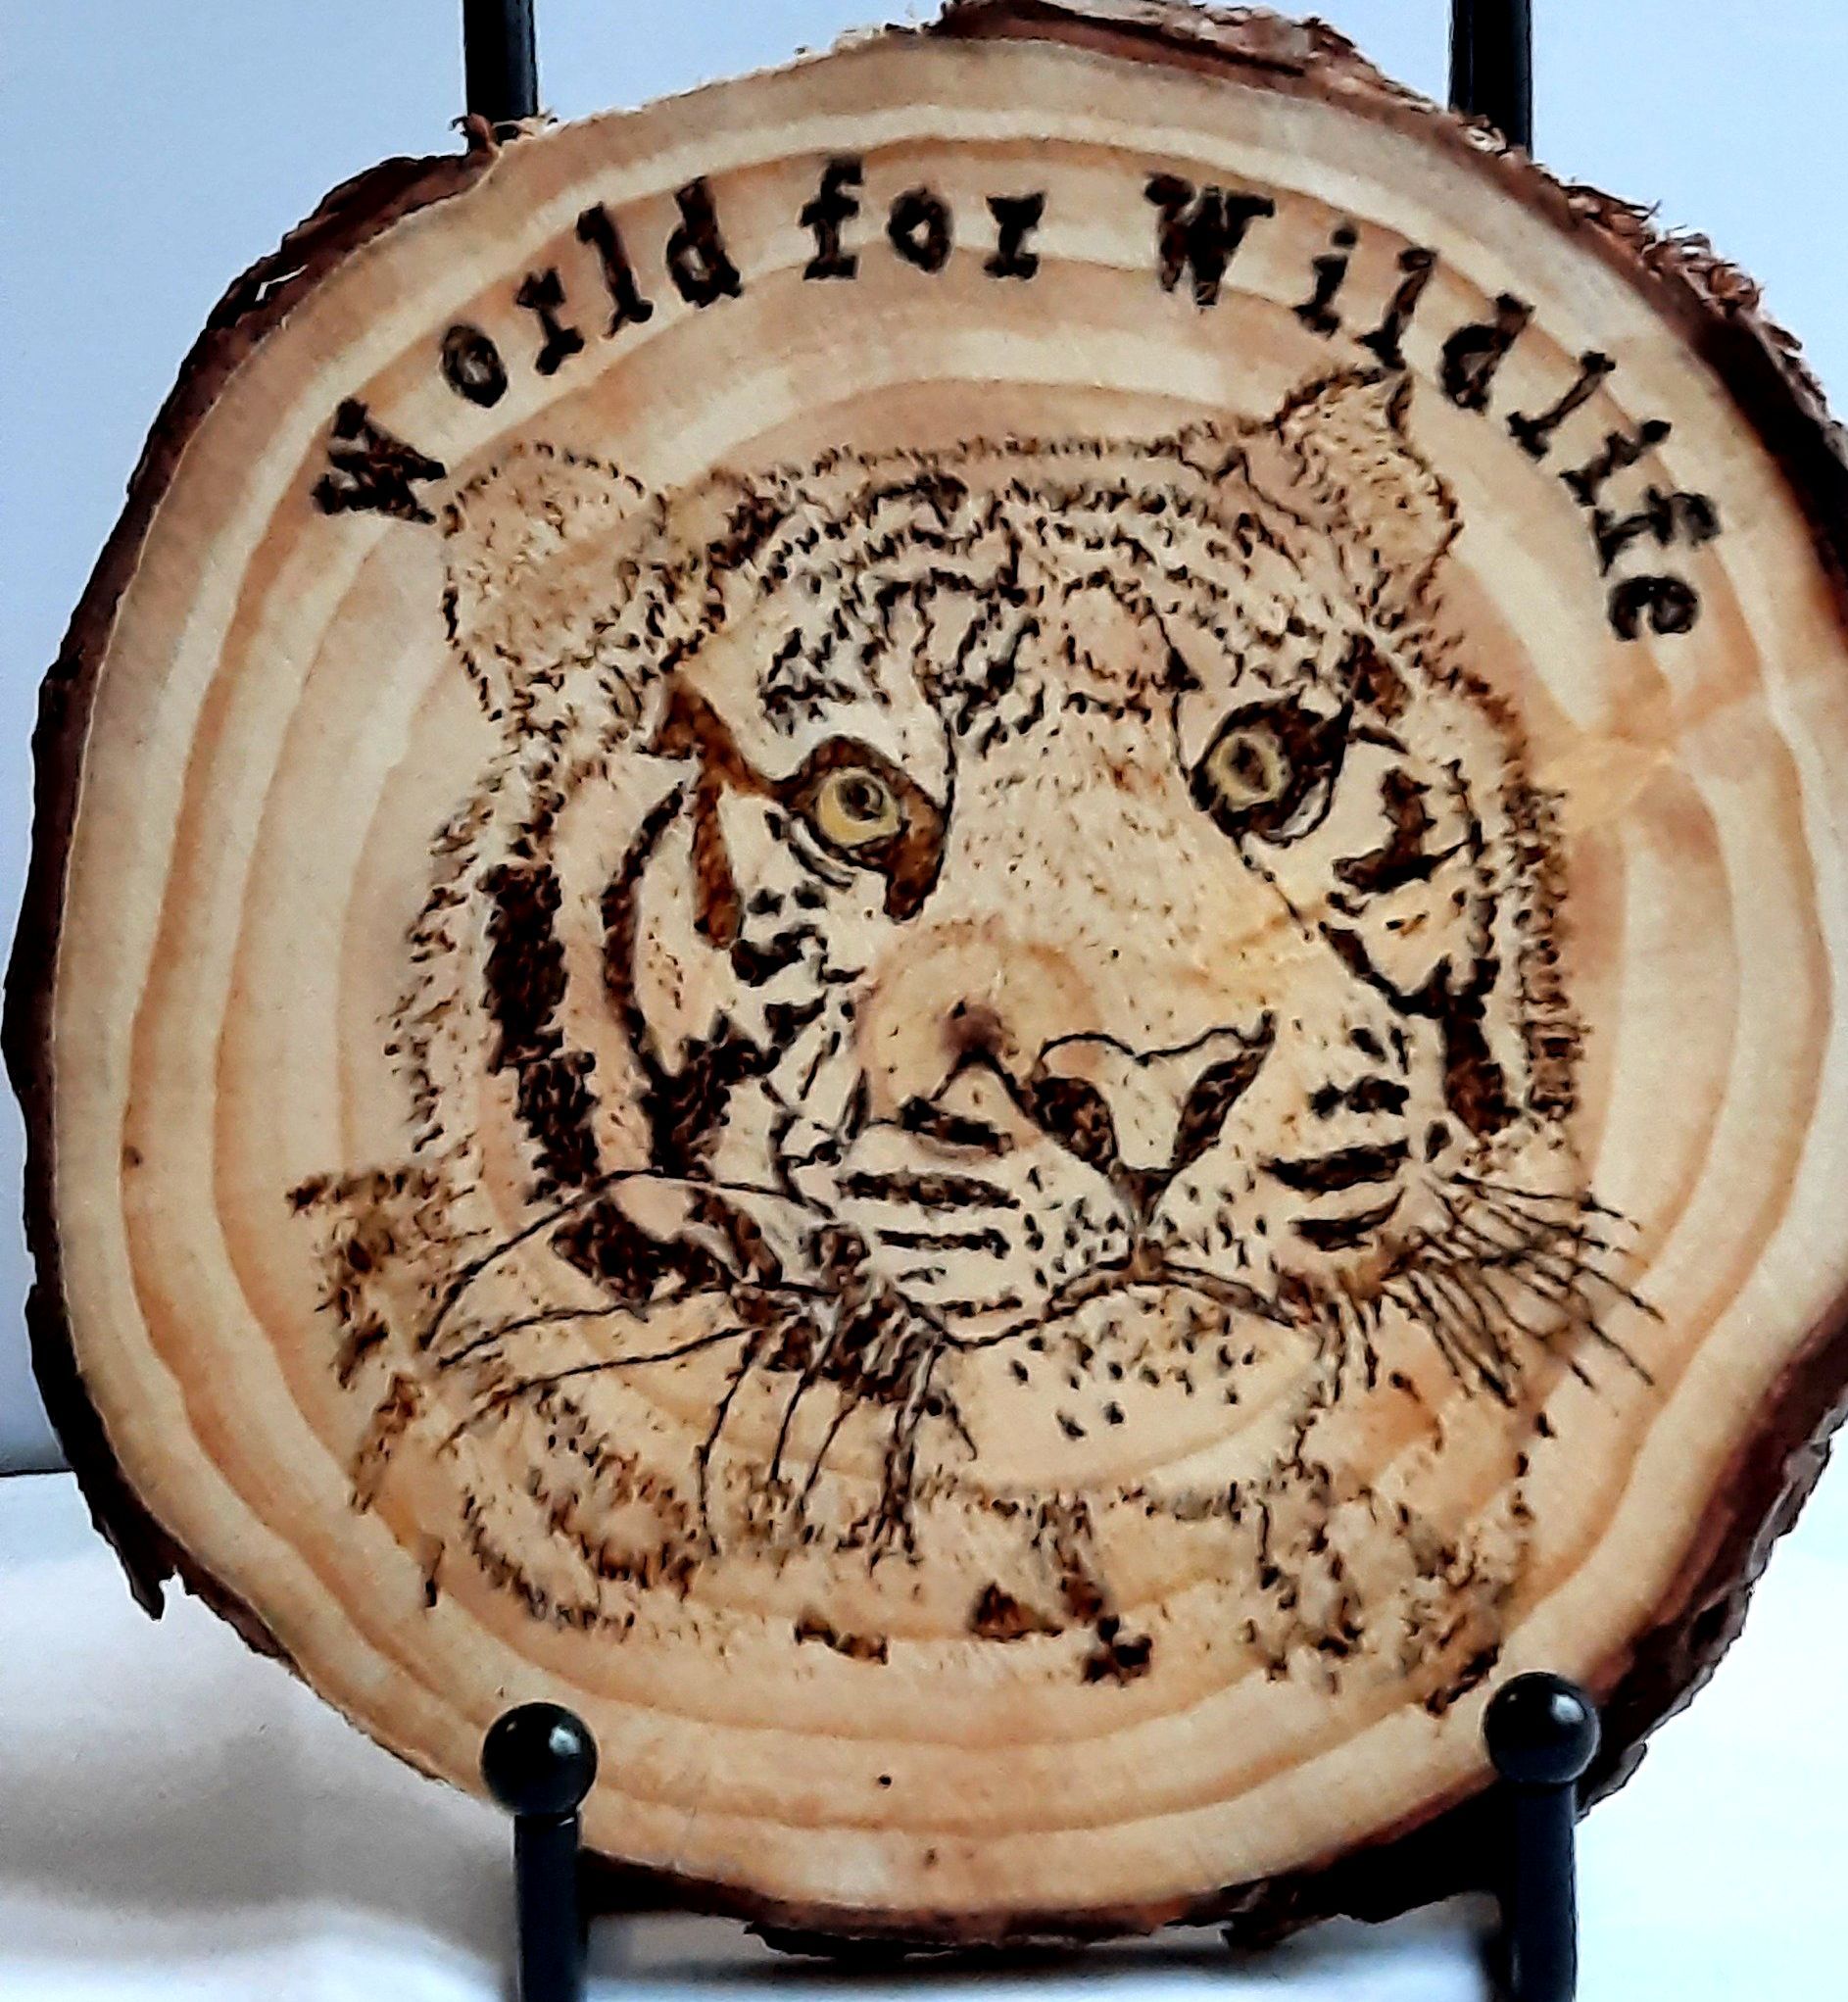 World, wildlife, conservation, animal, tiger, coaster, plaque, gift, wood, pyrography